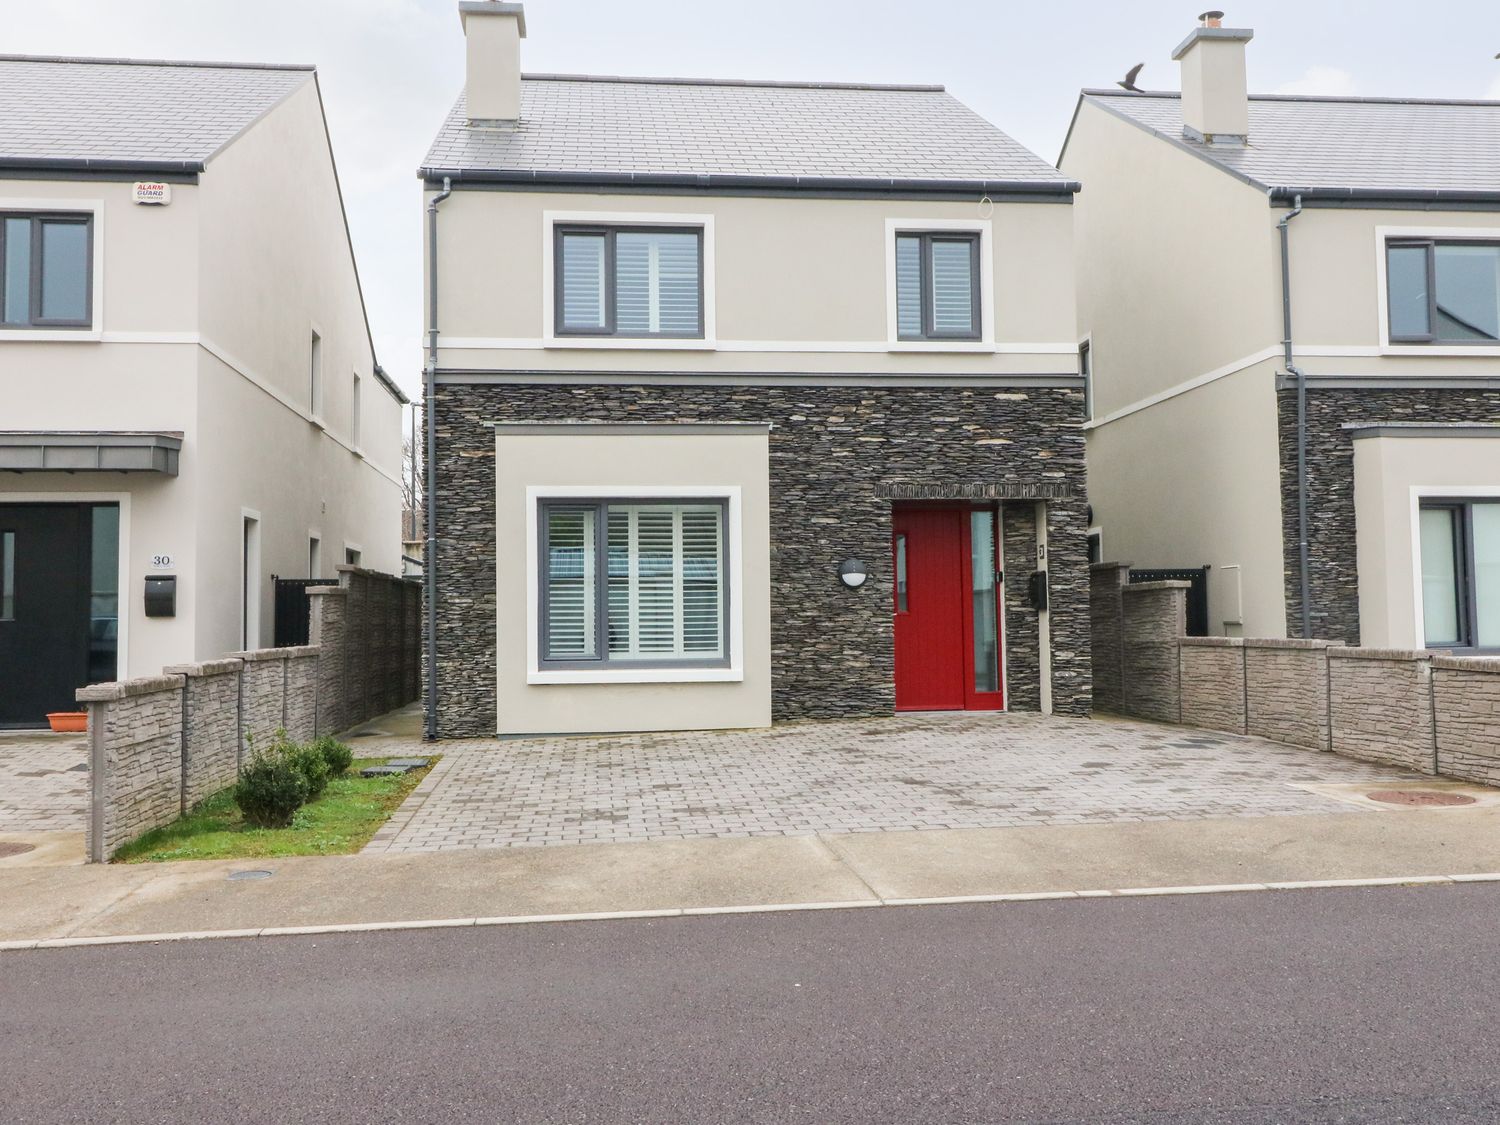 31 Rookery Woods - County Kerry - 1128625 - photo 1